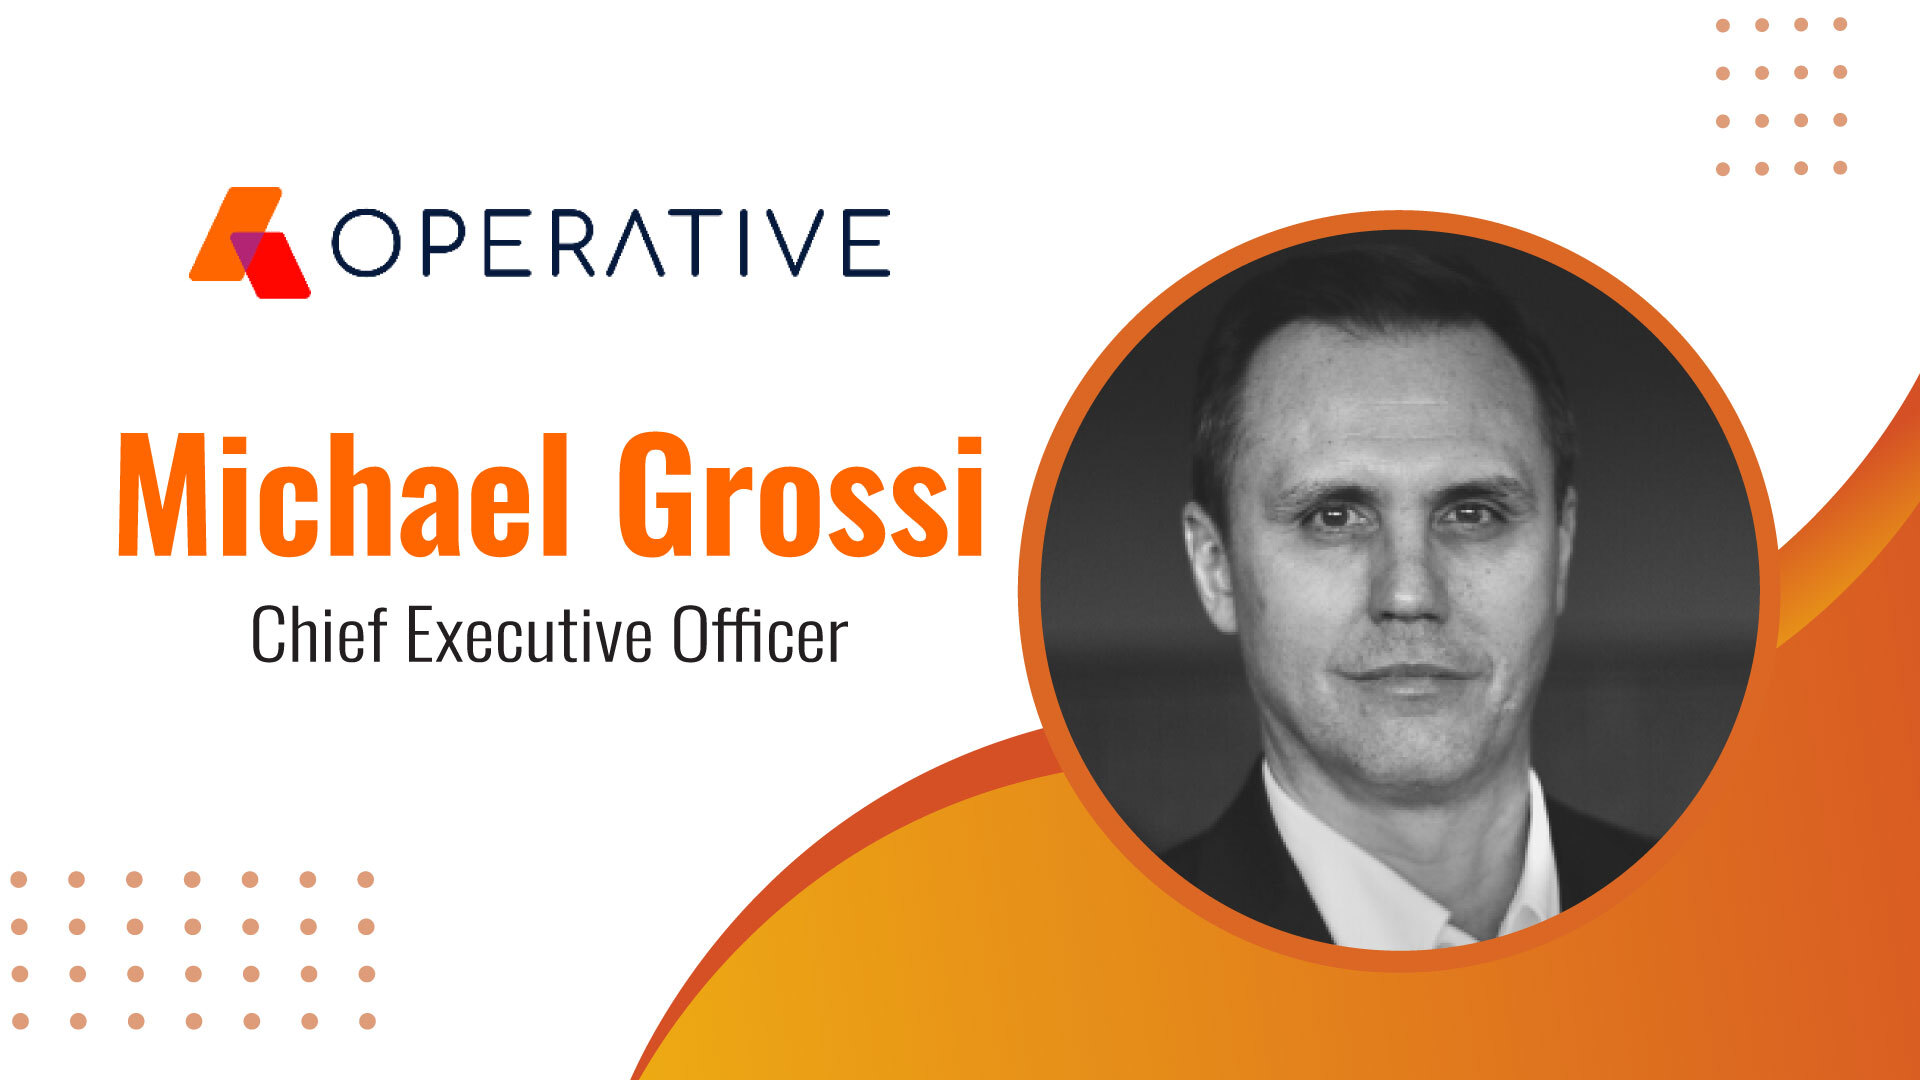 MarTech Edge Interview with Michael Grossi, Chief Executive Officer, Operative